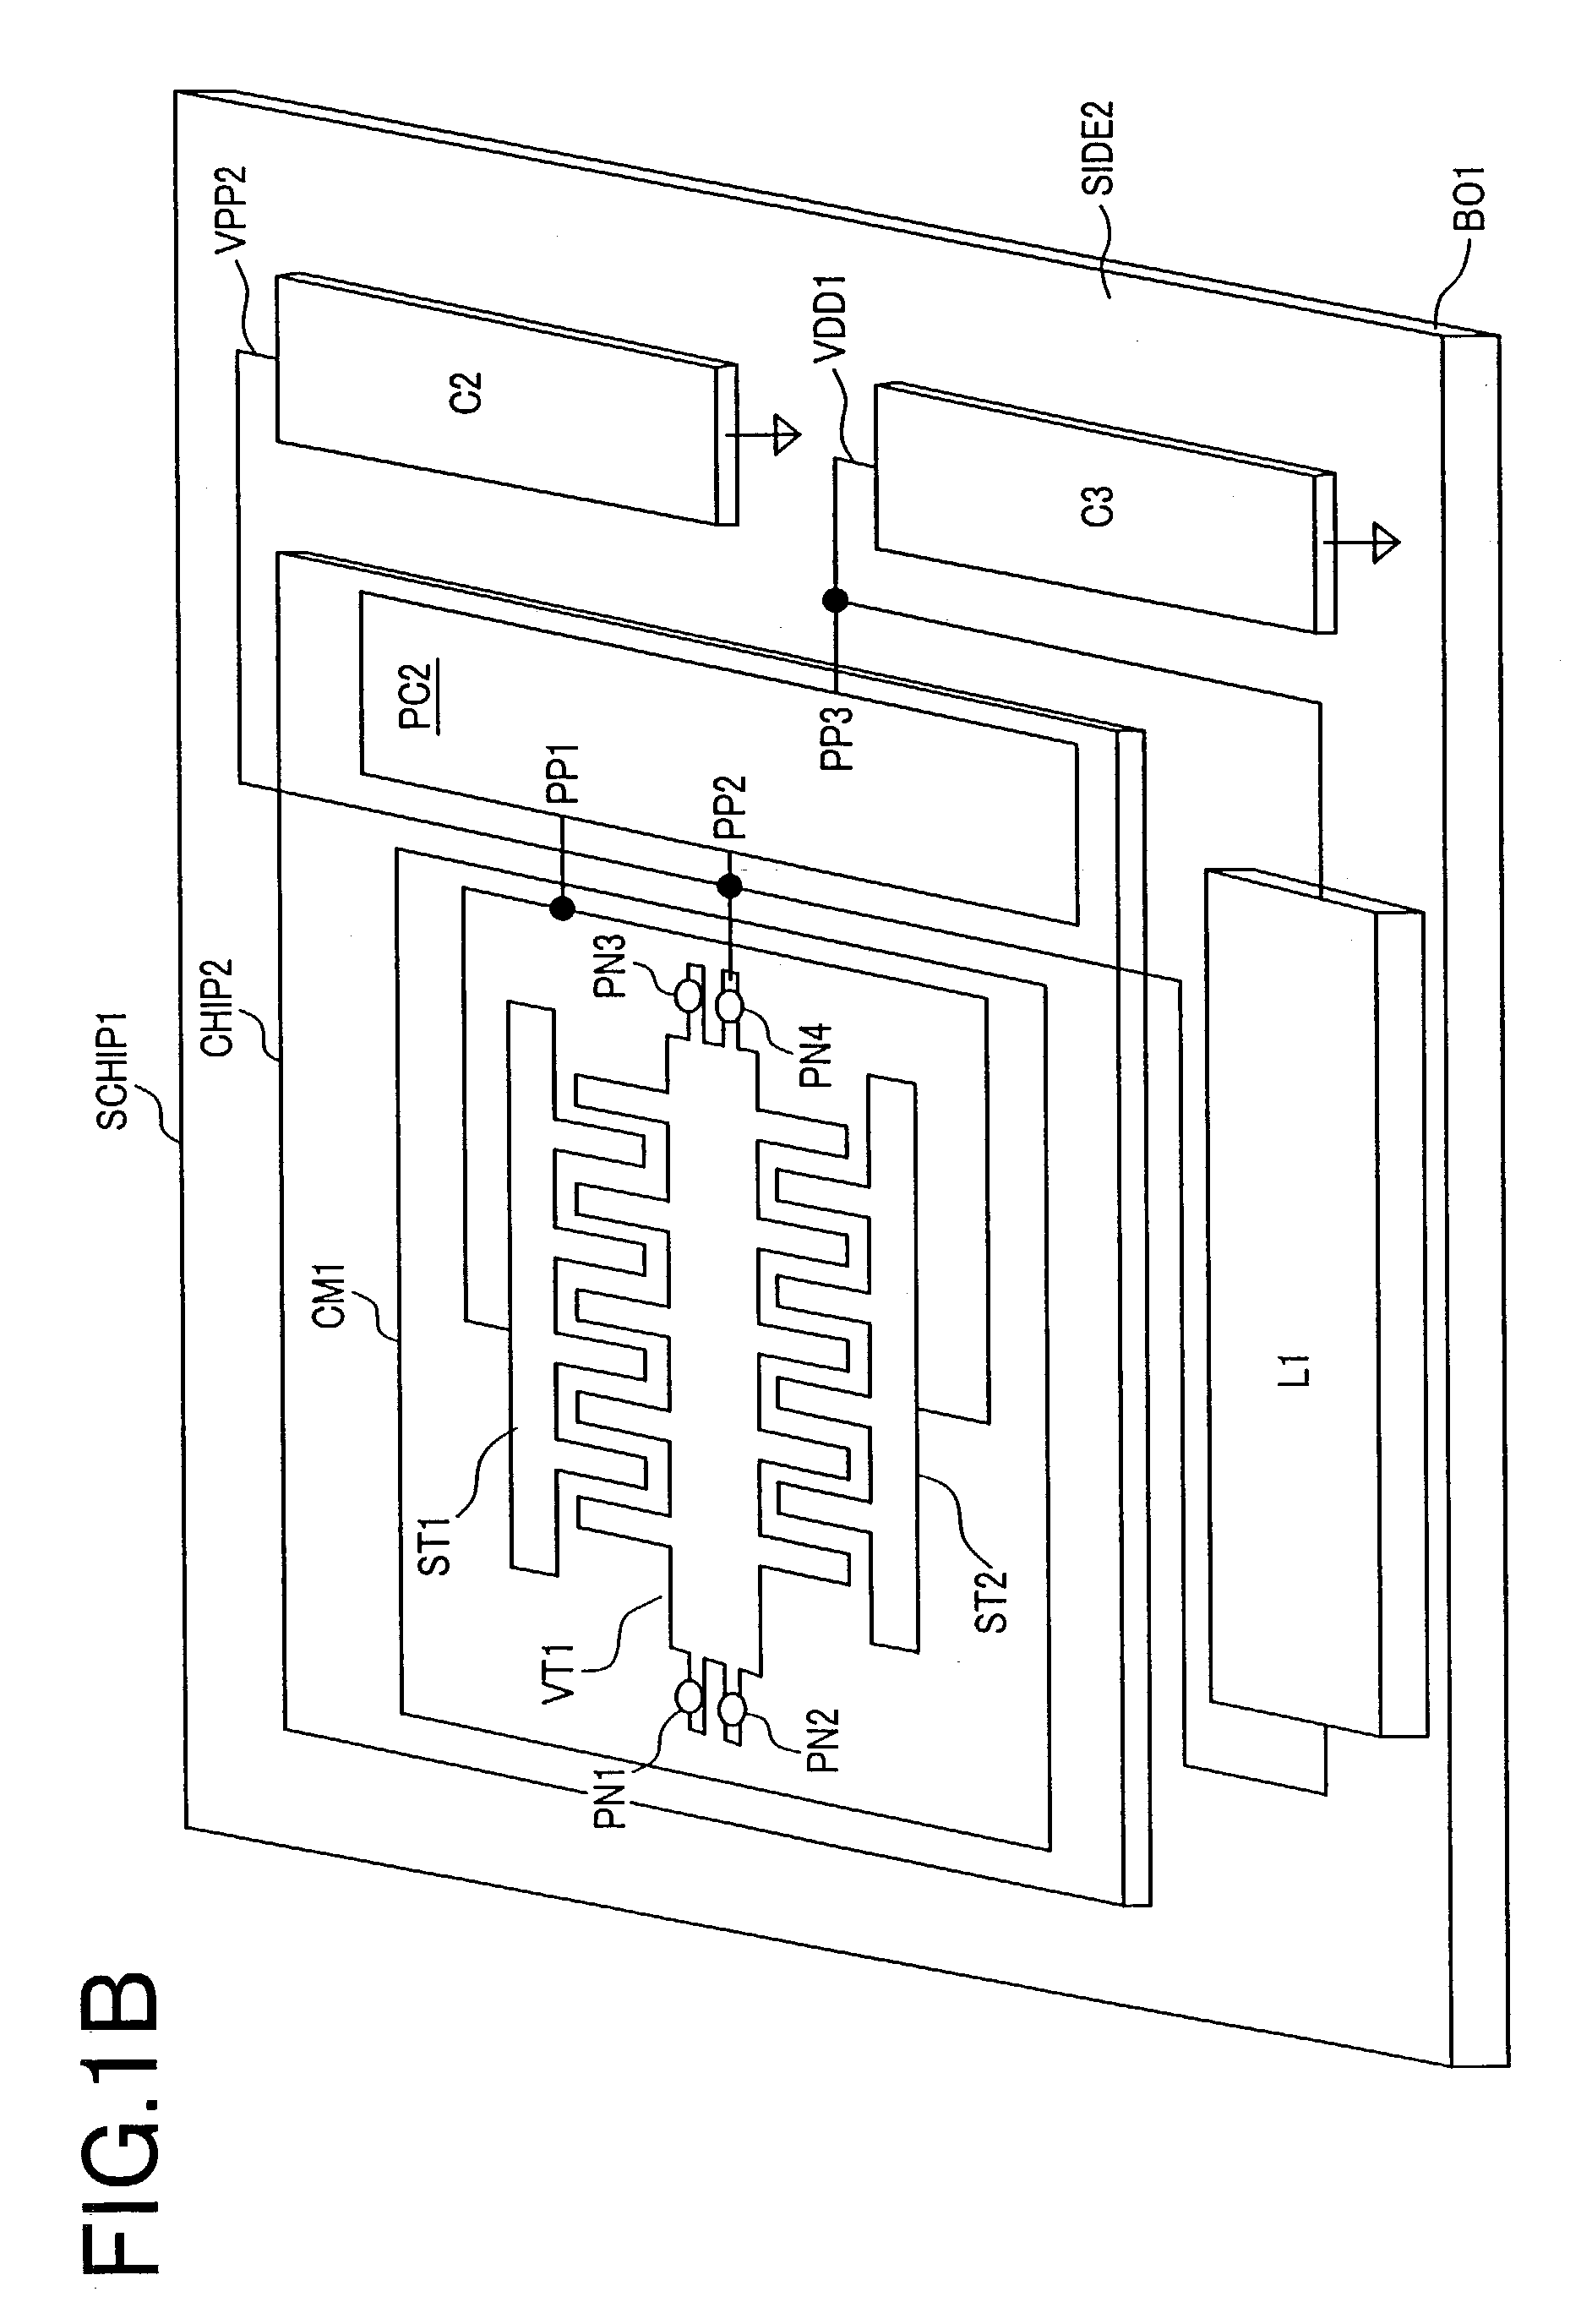 Semiconductor device for sensor system